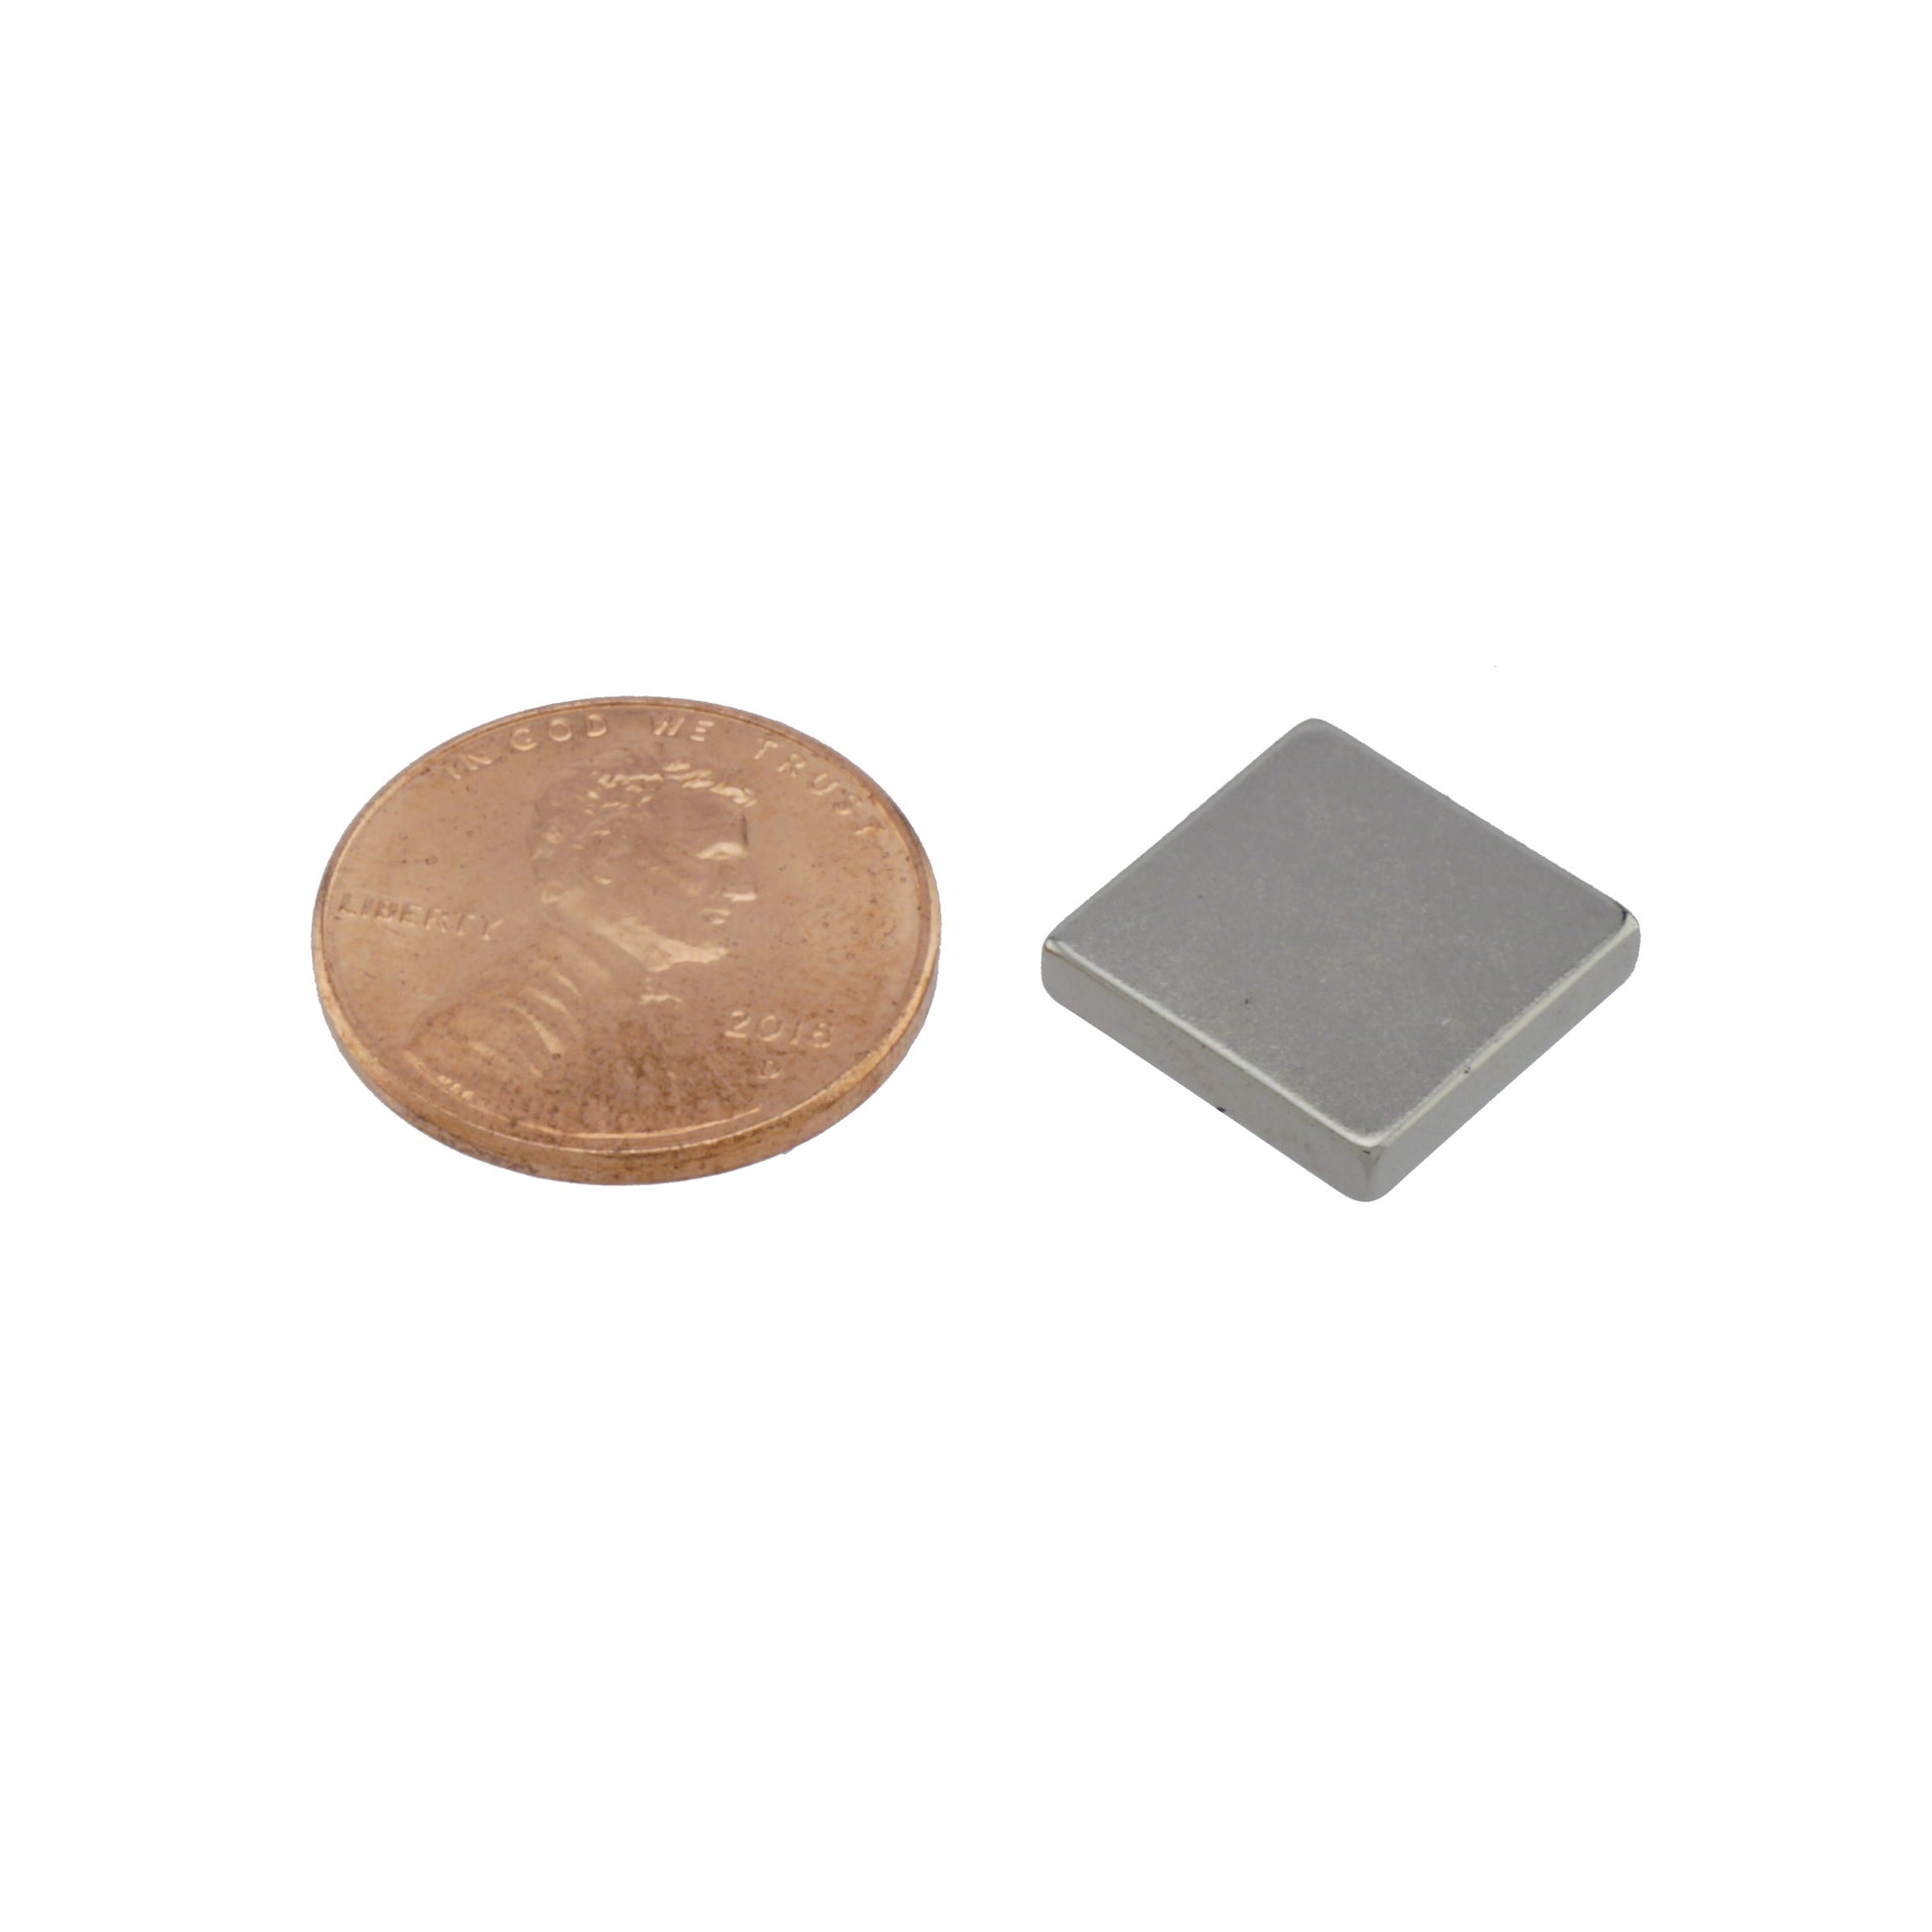 Load image into Gallery viewer, NB001016N Neodymium Block Magnet - Compared to Penny for Size Reference